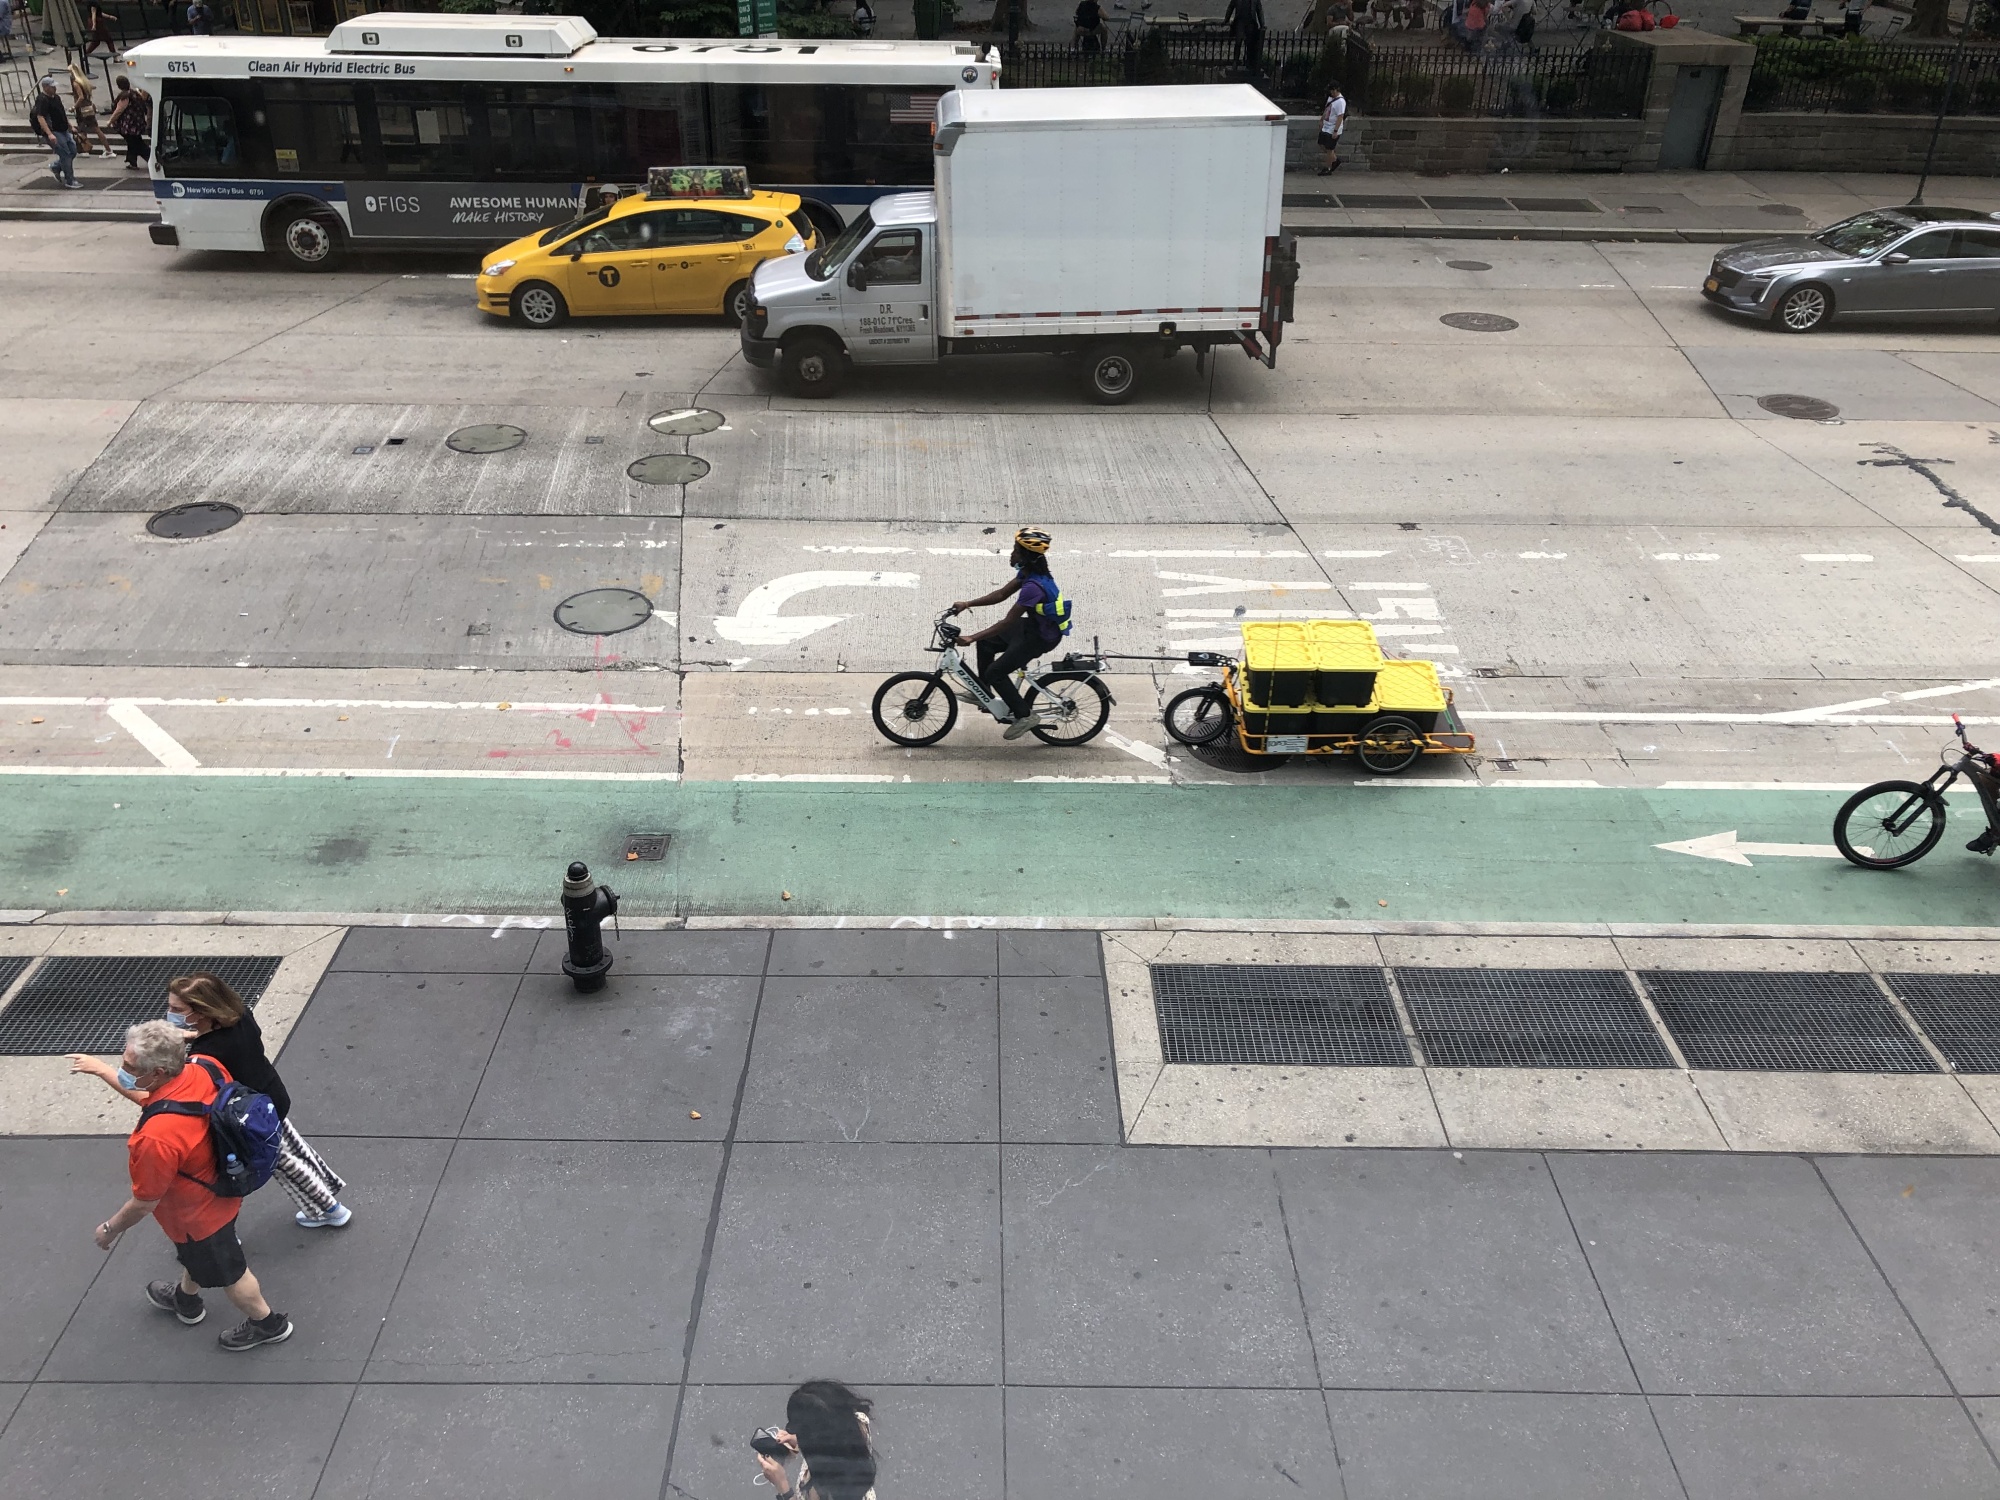 nyc-may-pay-people-for-reporting-bike-lane-blockers-bloomberg